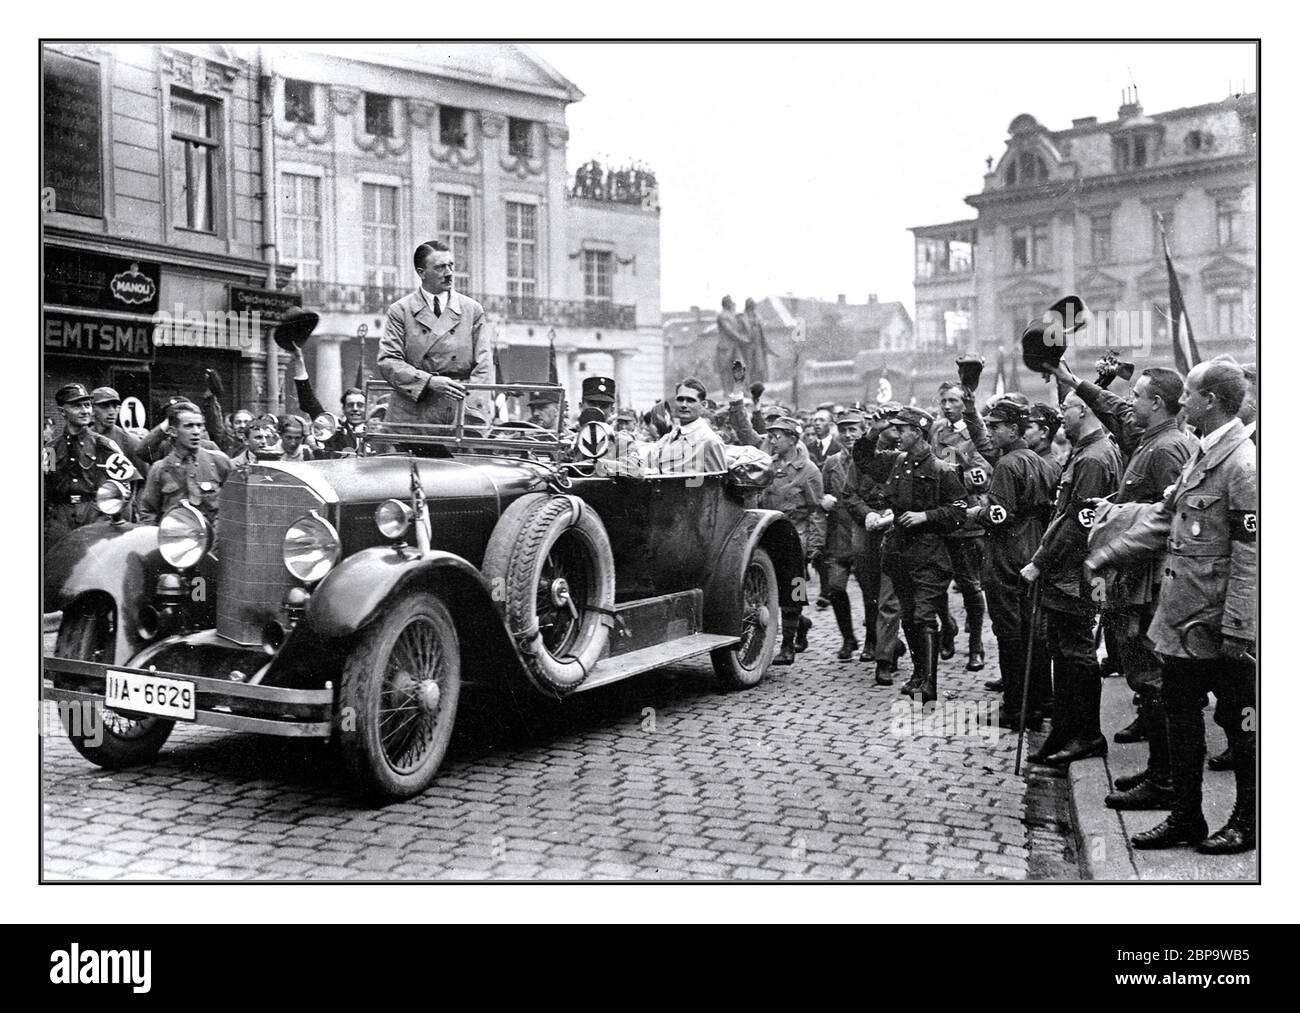 Adolf Hitler 1920’s Rally NSDAP Nazi Party pre election rally in Weimar Germany 3–4 July 1926, Hitler wearing civilian clothes standing in his open top Mercedes limousine motorcar with Rudolf Hess seated in the rear of the car. Various swastika armband wearing supporters cheering his arrival Stock Photo